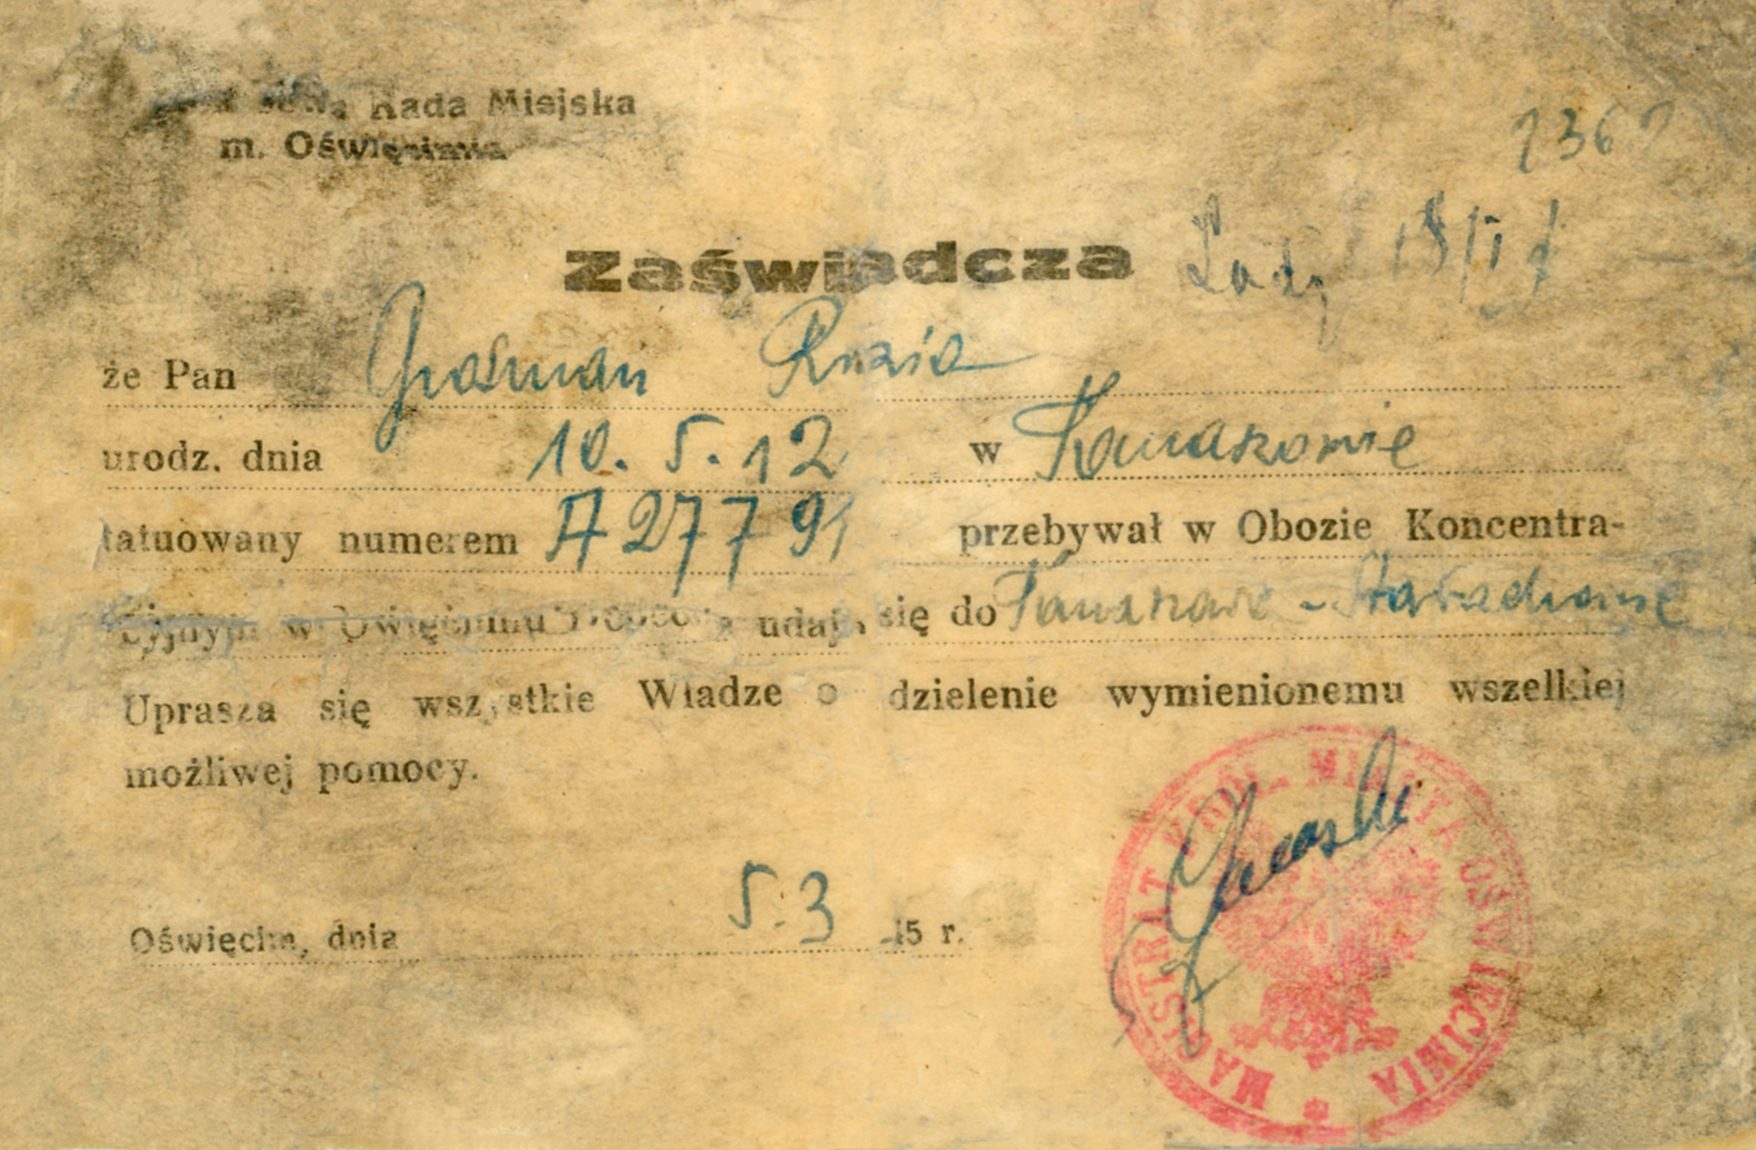 Identification card given to Reizel by the International Red Cross to provide safe passage home from Auschwitz. 1945